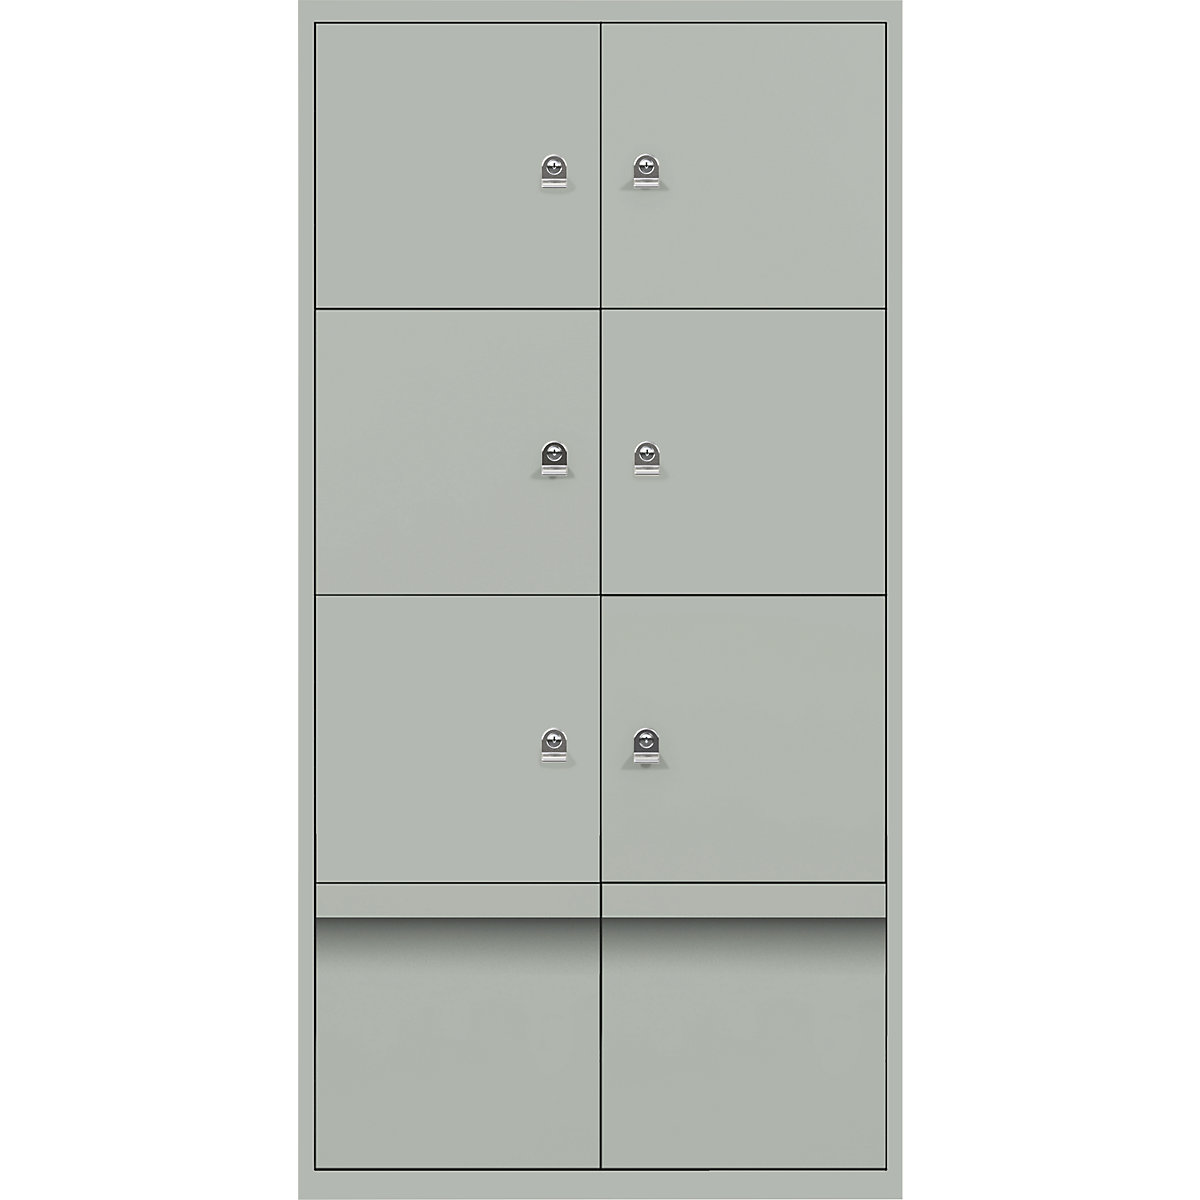 BISLEY – LateralFile™ lodge, with 6 lockable compartments and 2 drawers, height 375 mm each, york